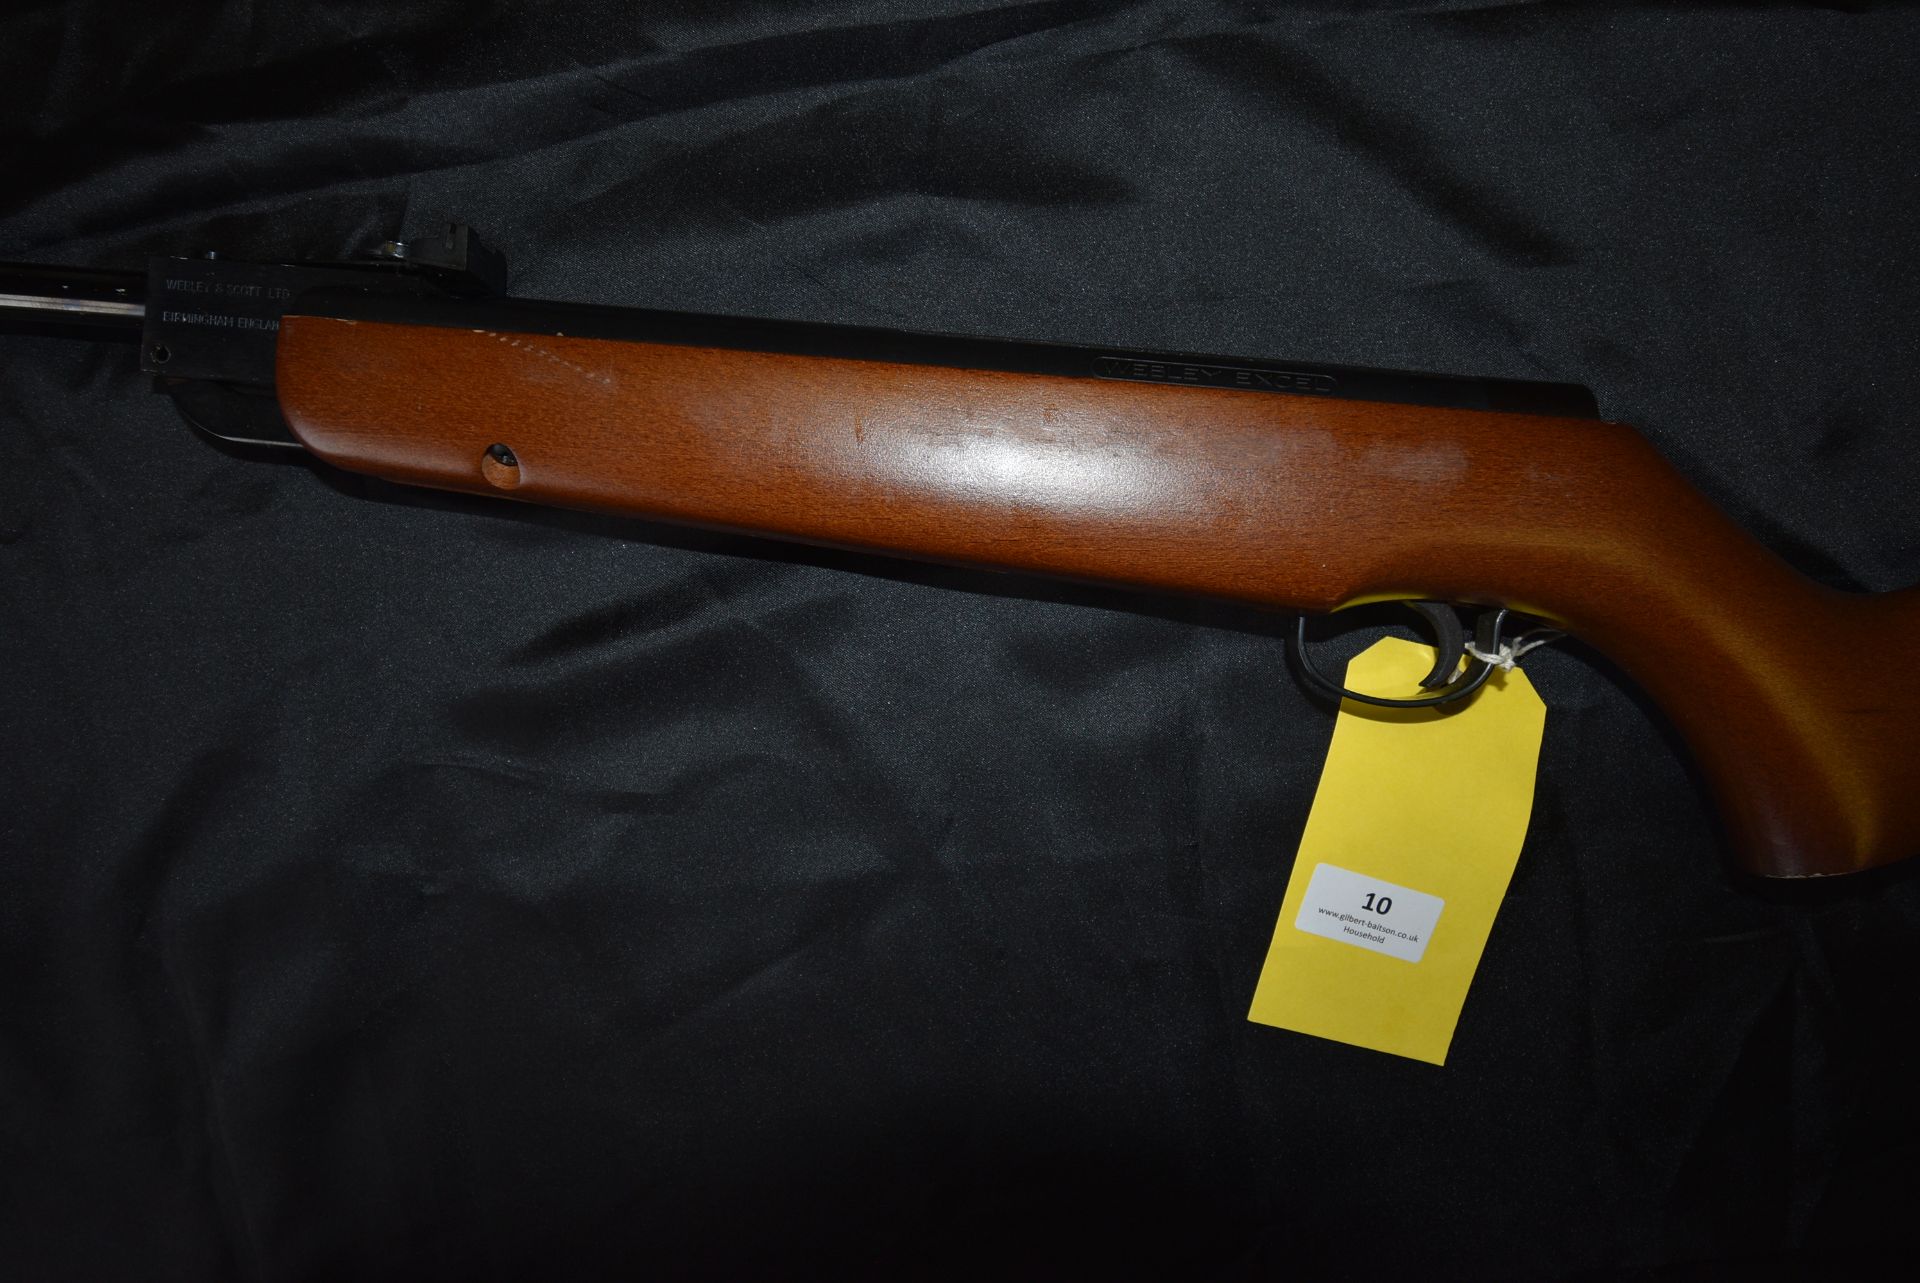 Webley & Scott Limited Excel 22 Air Rifle Serial No. 848339 - Image 2 of 4